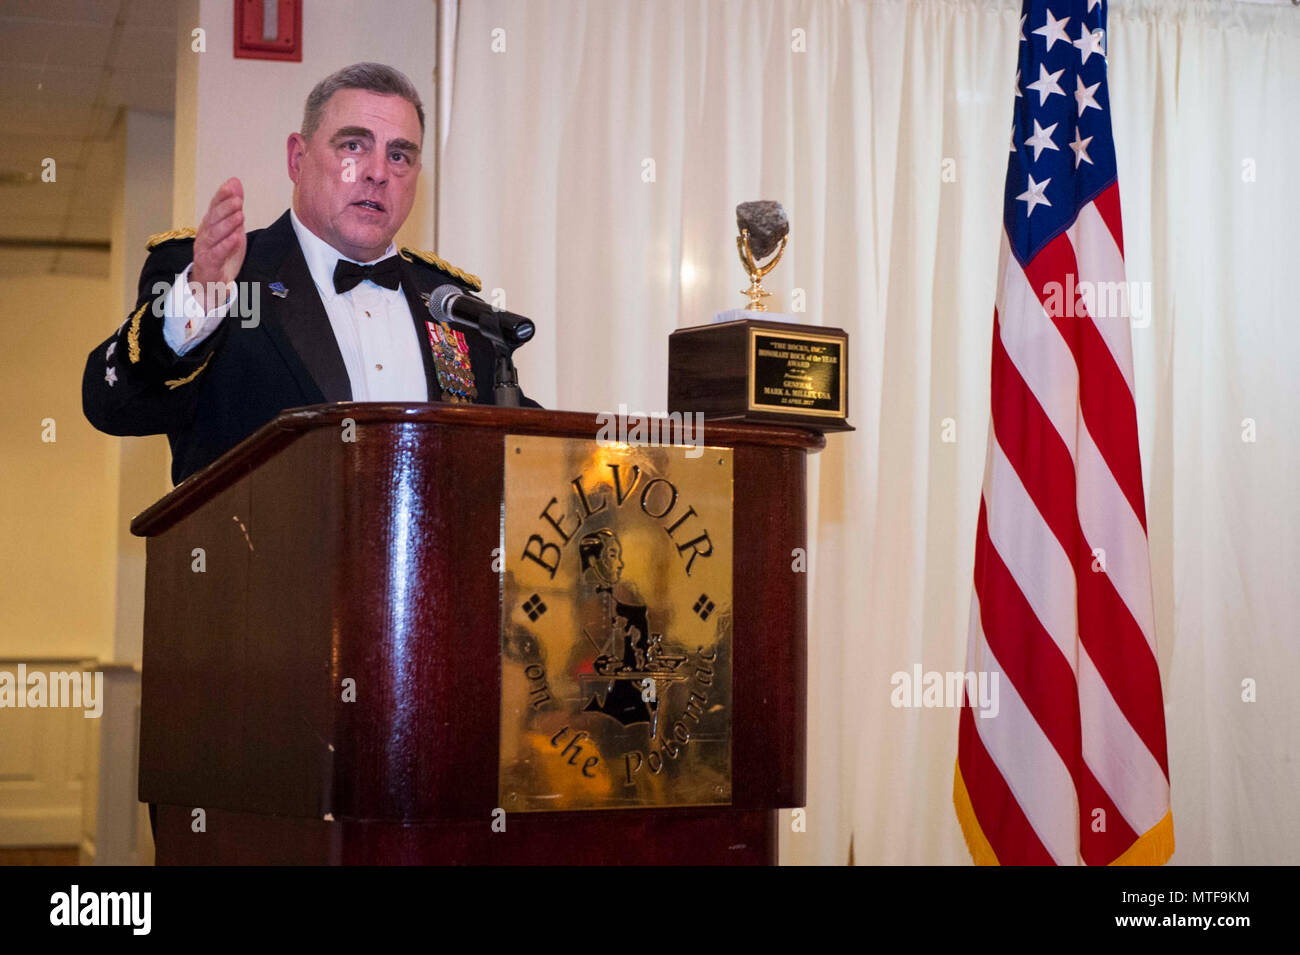 U.S. Army Chief of Staff Gen. Mark A. Milley addresses attendees after receiving the Honorary ROCK of the Year Award during the 43rd annual ROCKS Spring Gala and Awards Ceremony, Ft. Belvoir, Va., April 22, 2017. Stock Photo